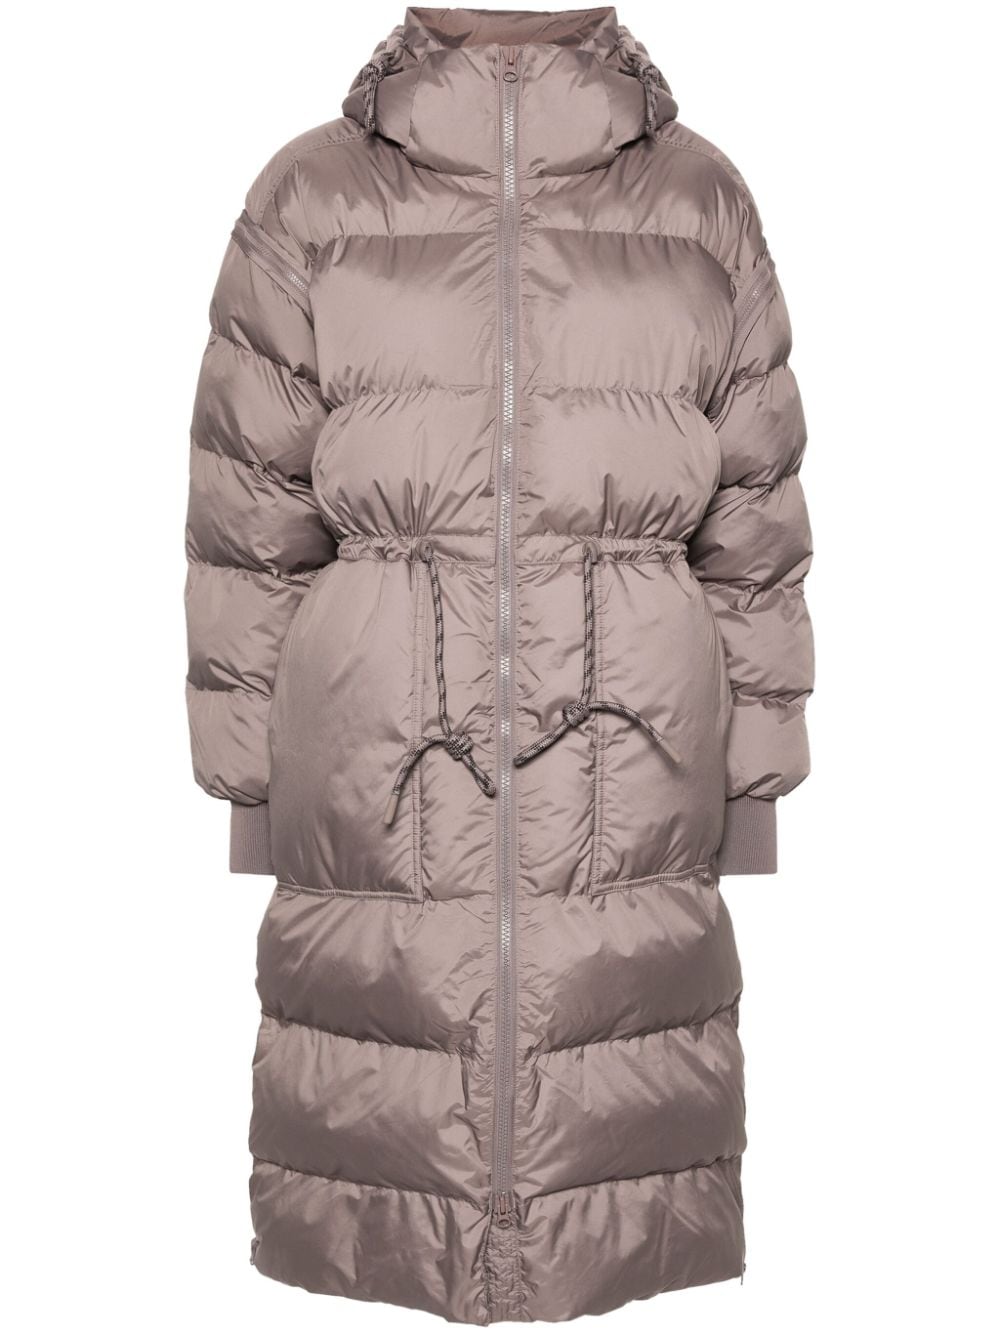 adidas by Stella McCartney padded quilted long coat - Neutrals von adidas by Stella McCartney